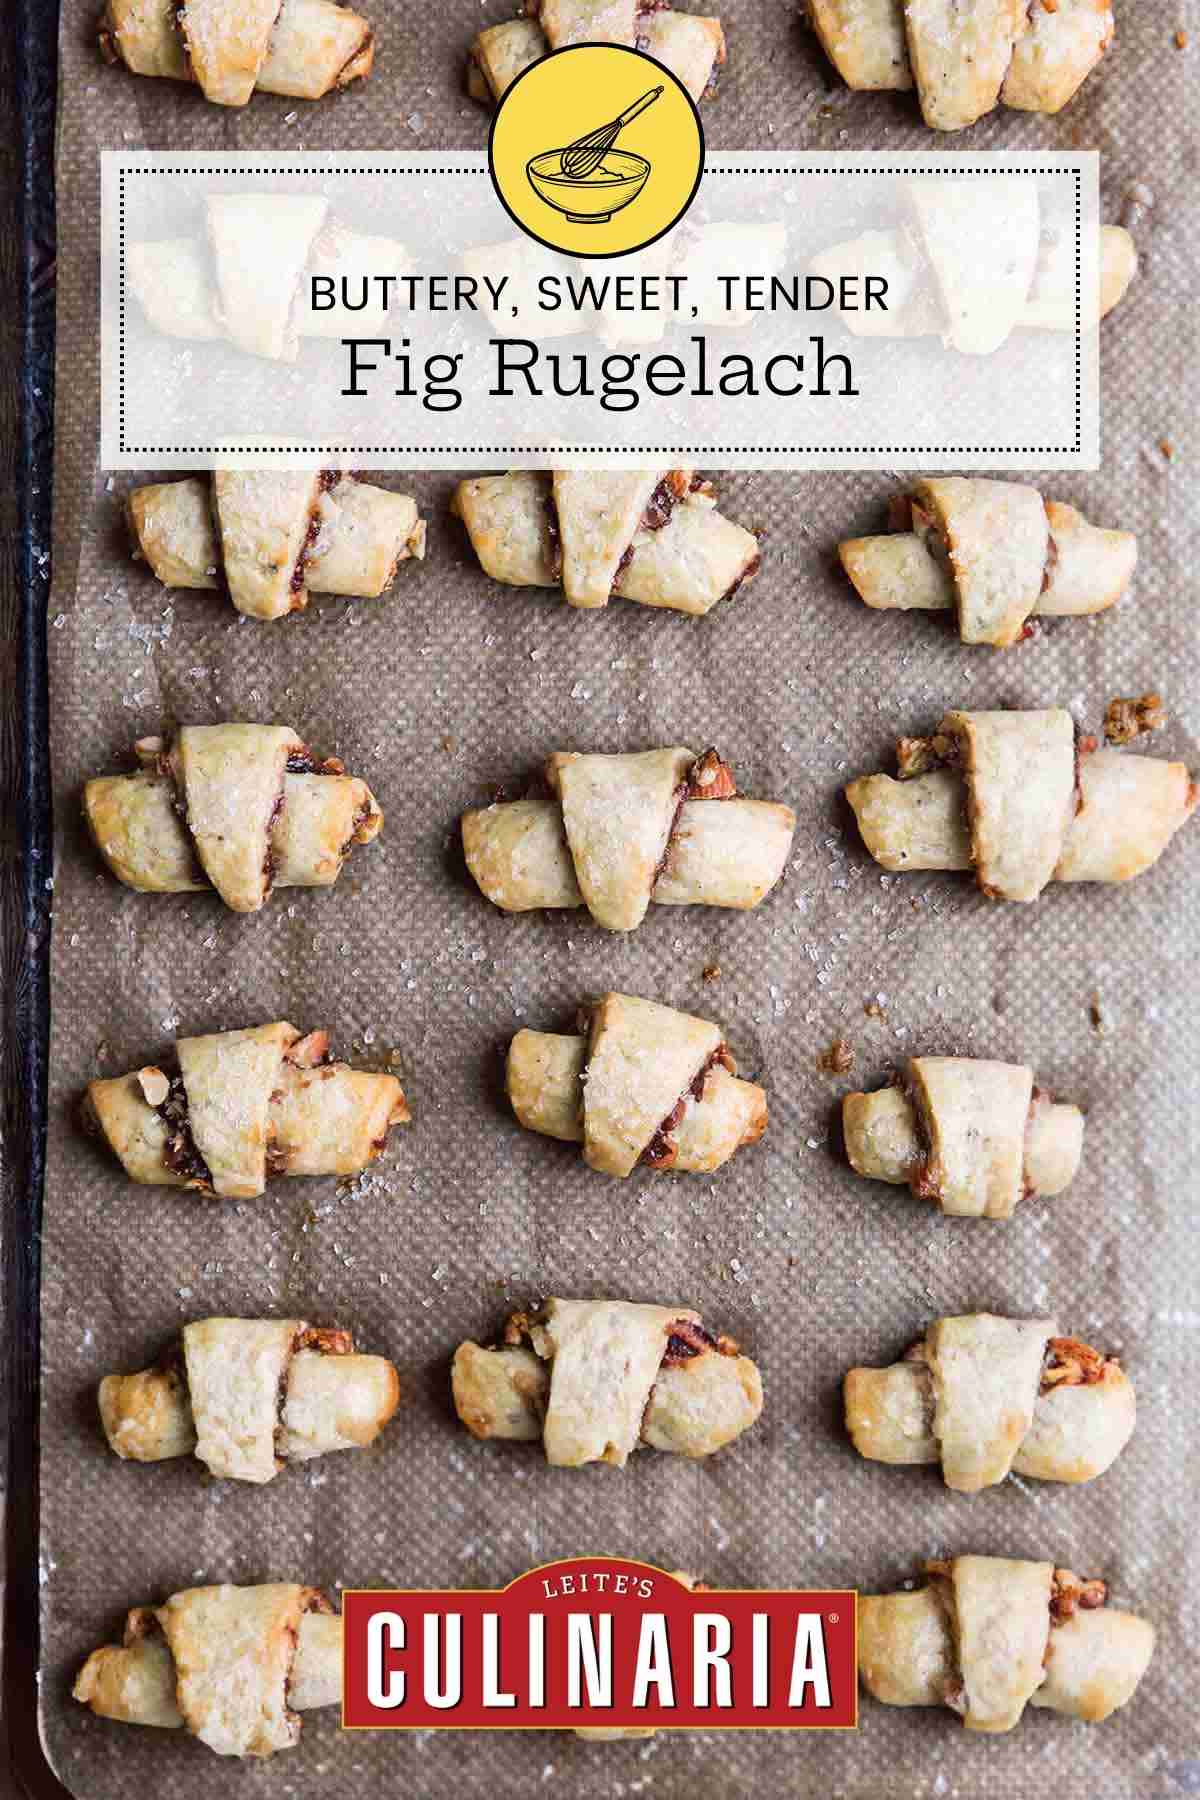 A baking sheet with four rows of baked fig rugelach.